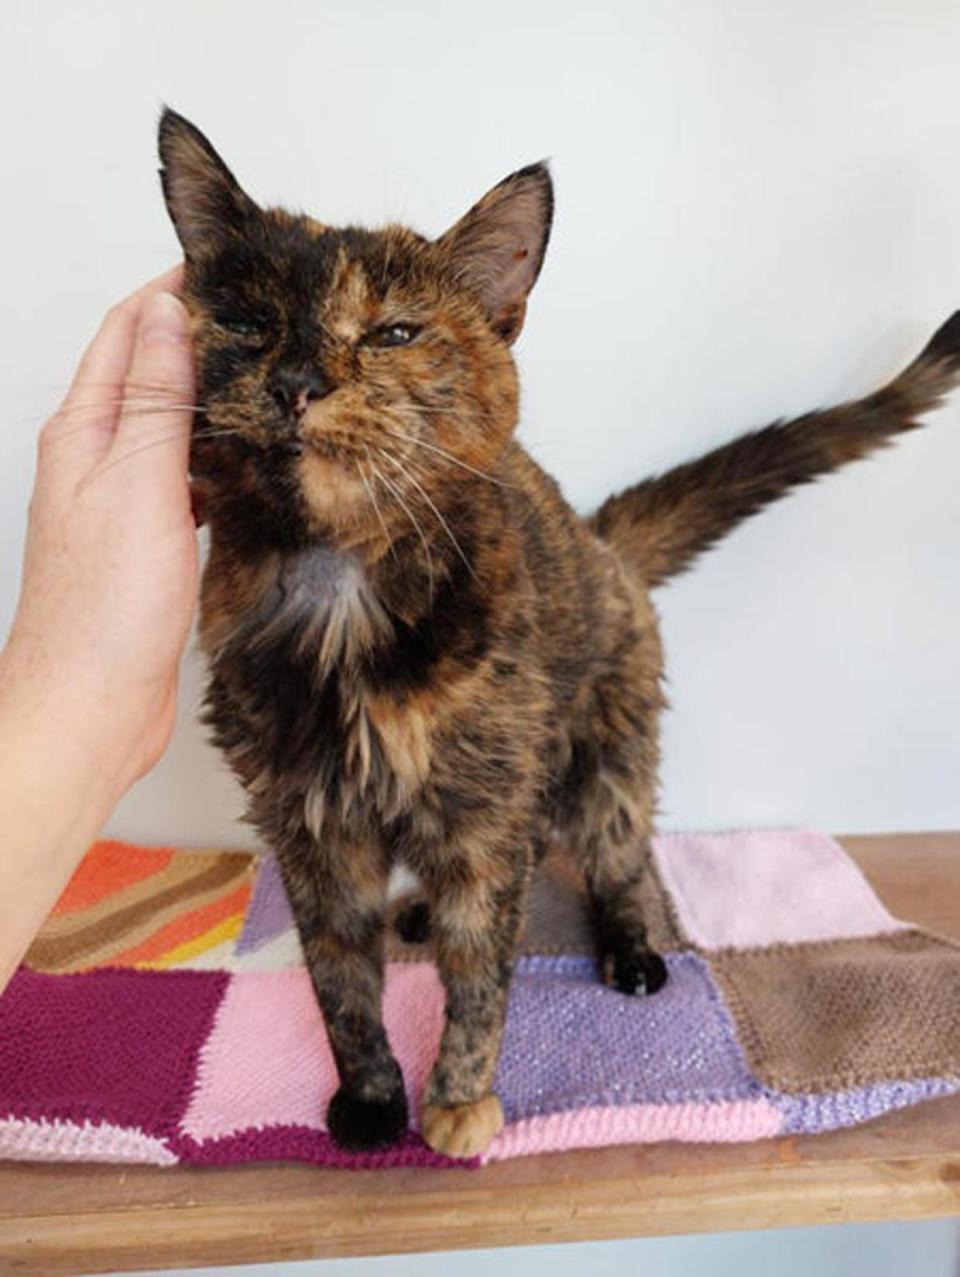 Meet Flossie: At nearly 27 years old – the feline equivalent of 120 human years old – the senior lady has been crowned the world’s oldest living cat by Guinness World Records.